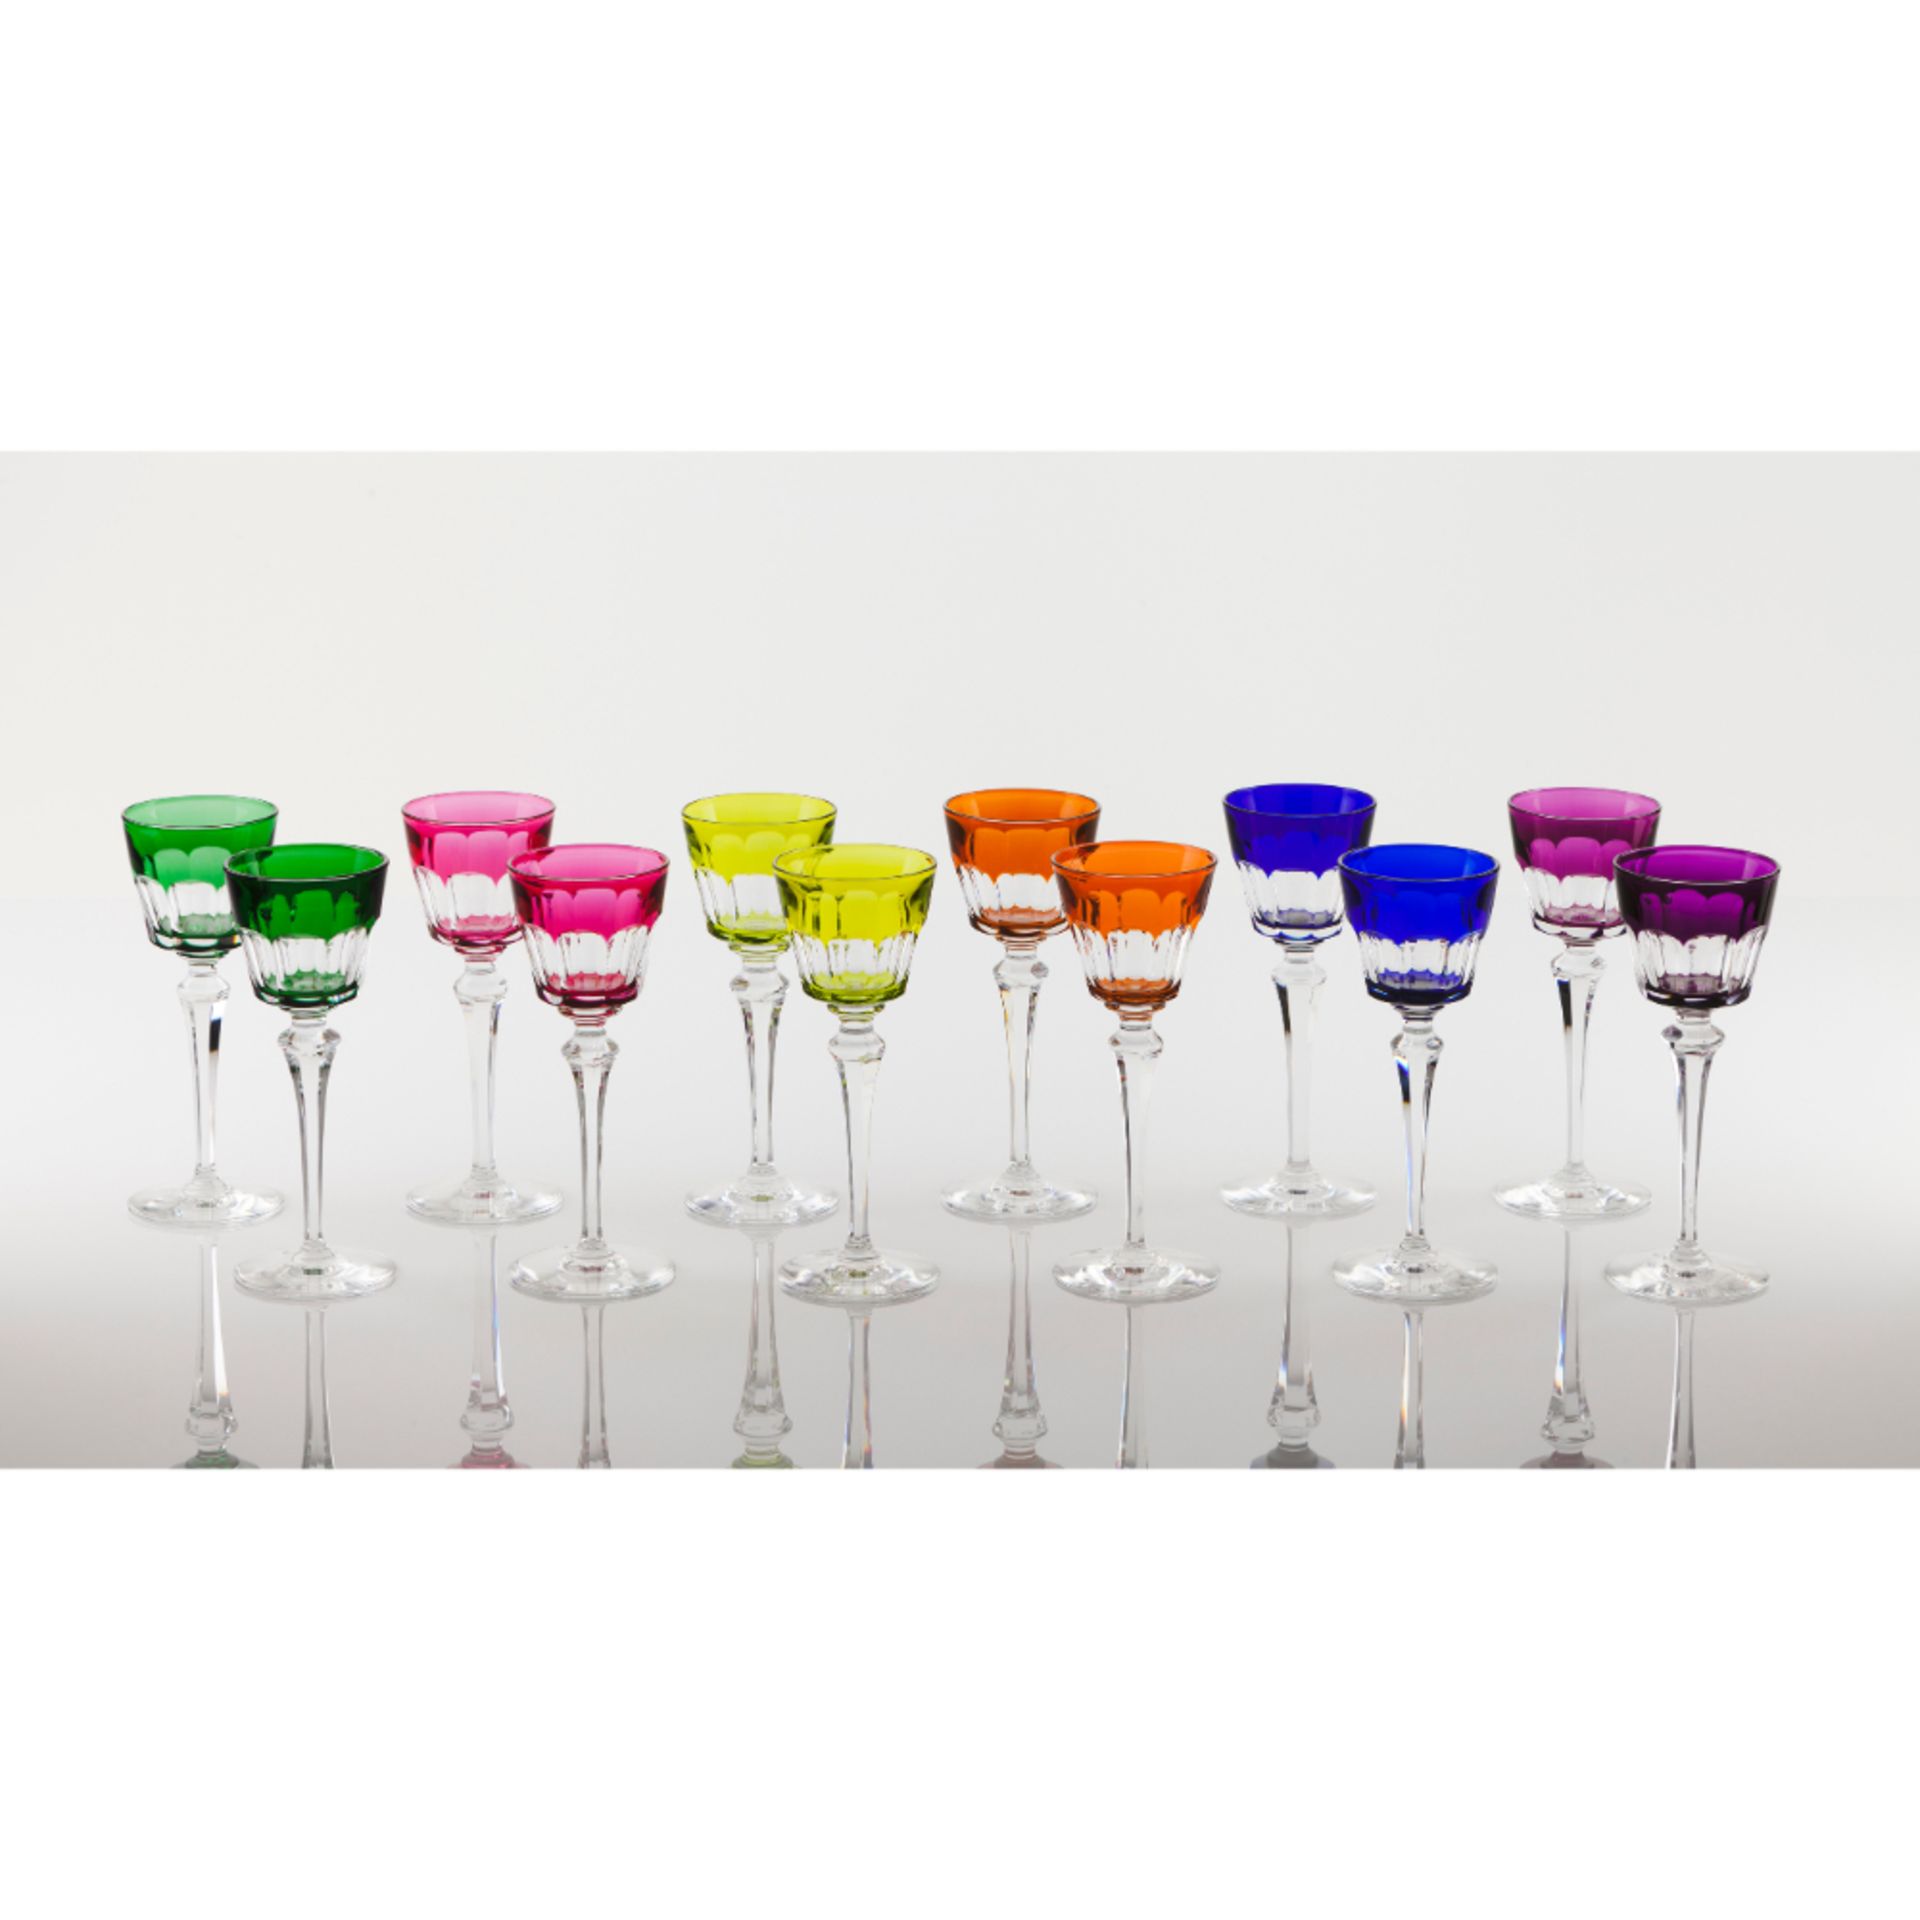 A set of 12 "Roemers" glasses